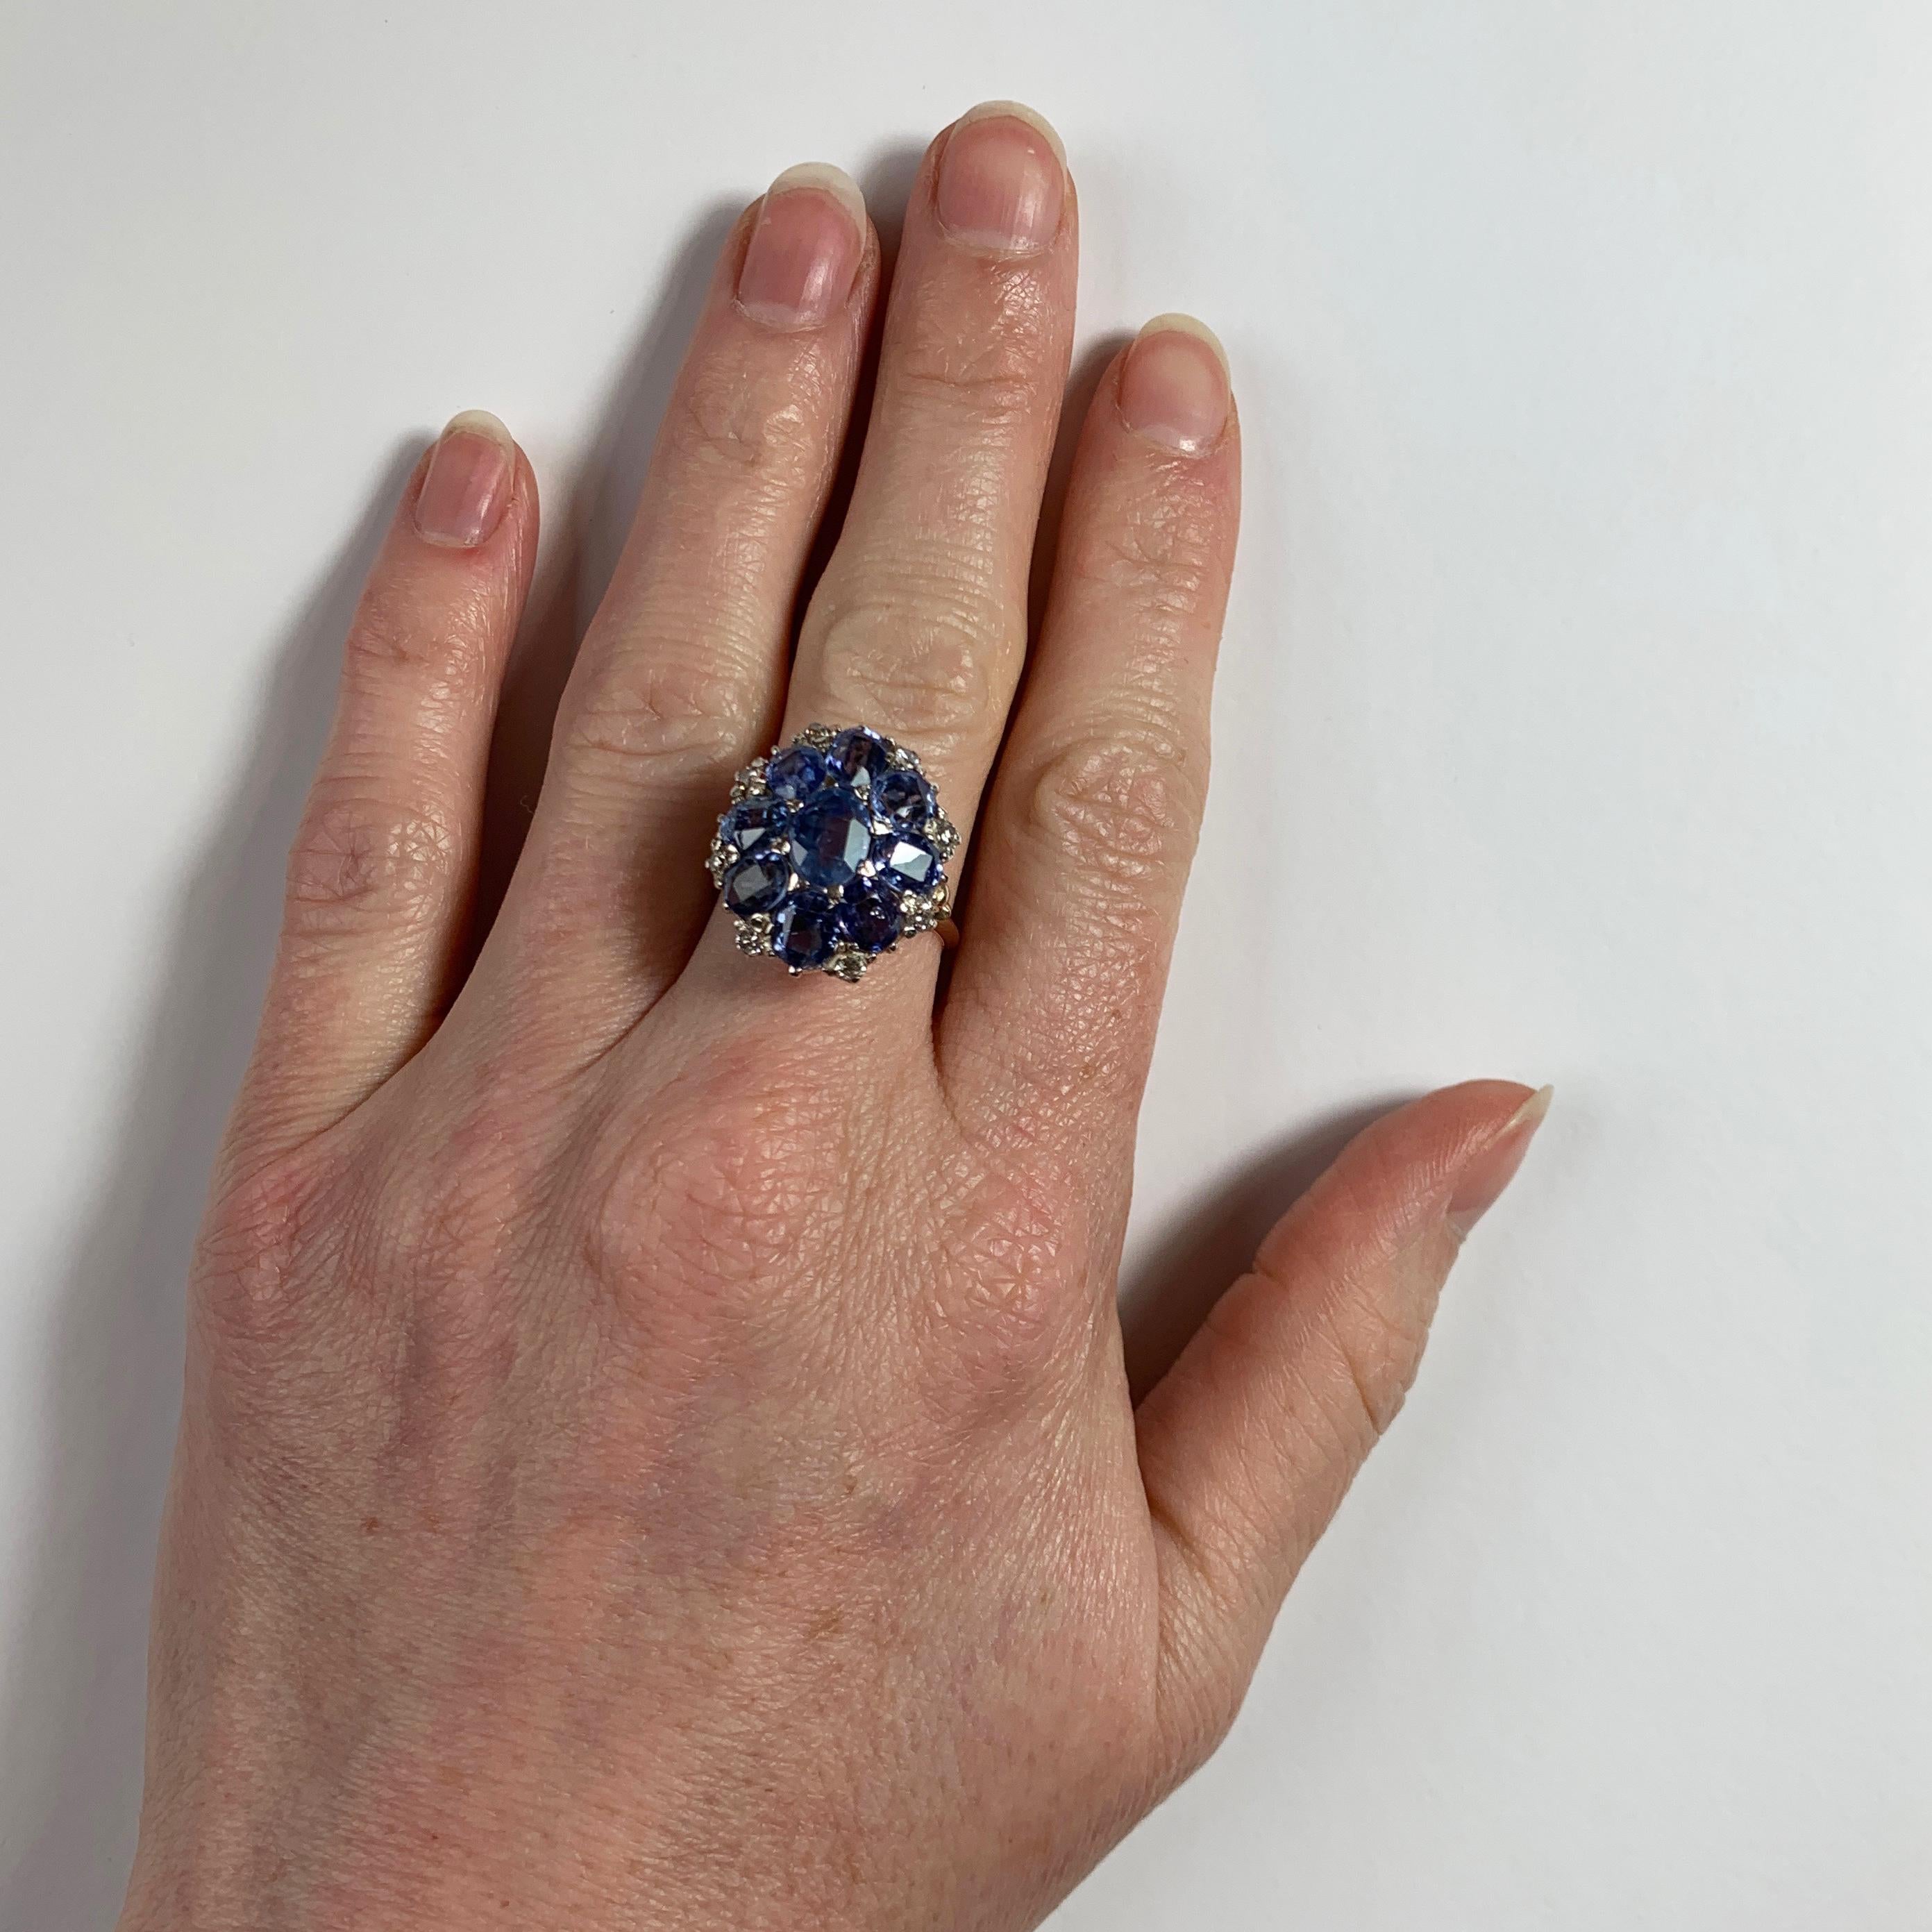 An 18 karat (18K) white and rose gold sapphire and diamond cluster ring set with nine oval blue sapphires and eight round brilliant cut white diamonds. The centre sapphire is estimated to weigh approximately 1.70 carats. The sapphires show no